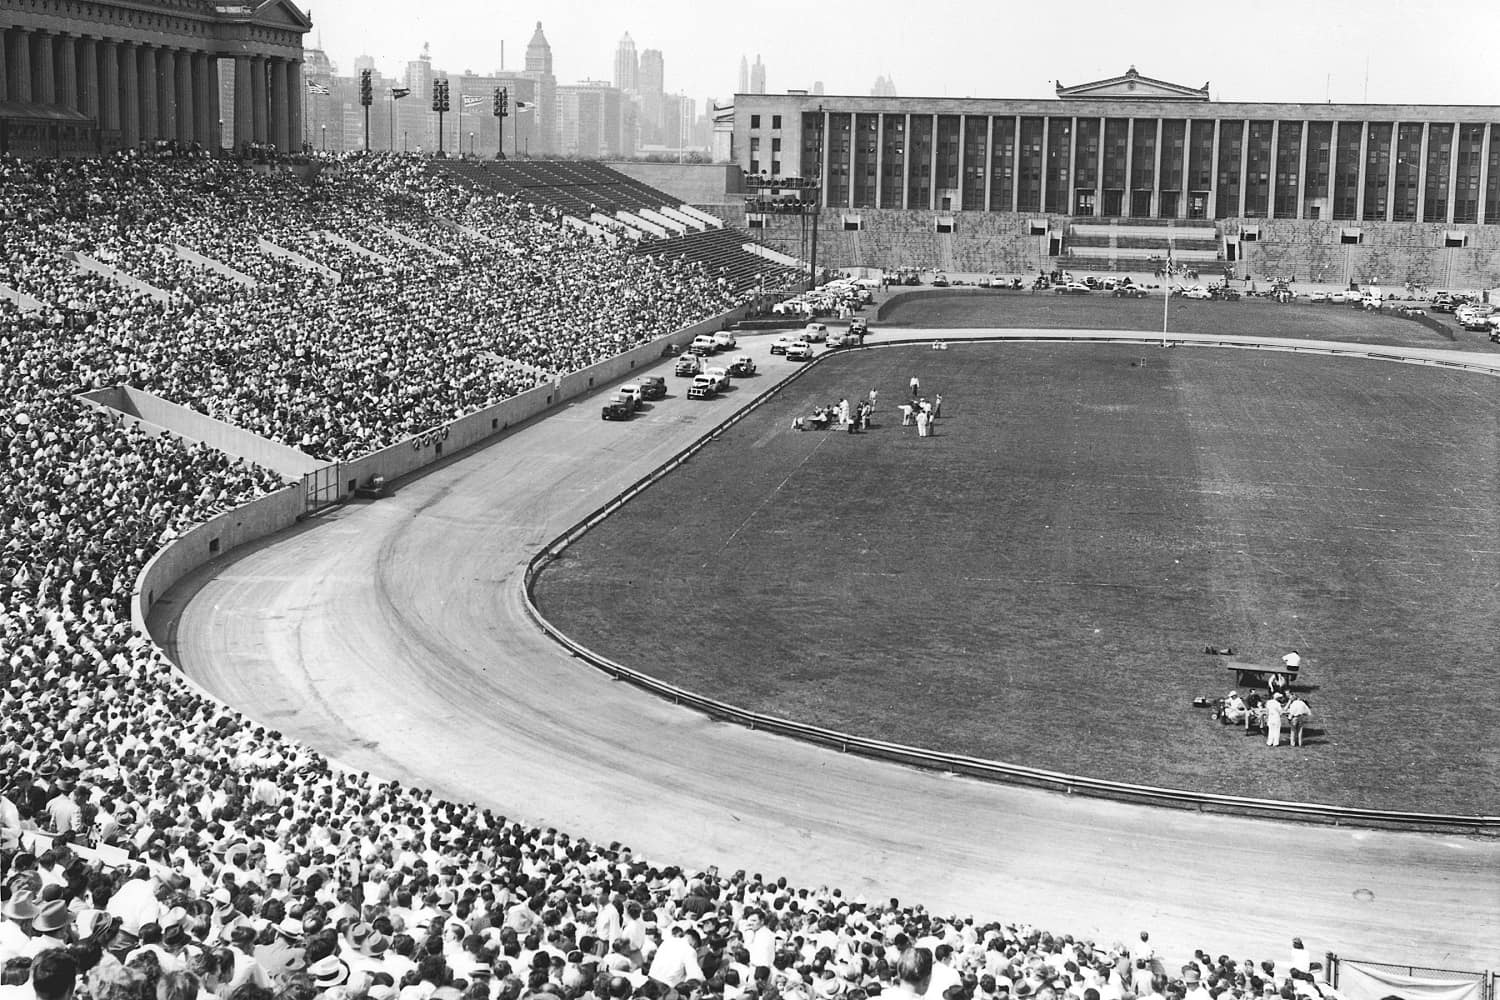 Early stock car racing action at Soldier Field. The track hosted just one NASCAR Cup race in 1956 that was won by Fireball Roberts. Three NASCAR Convertible Series events were held from 1956 through 1957 as well, with Chicago native Tom Pistone winning the first. ISC Images & Archives via Getty Images